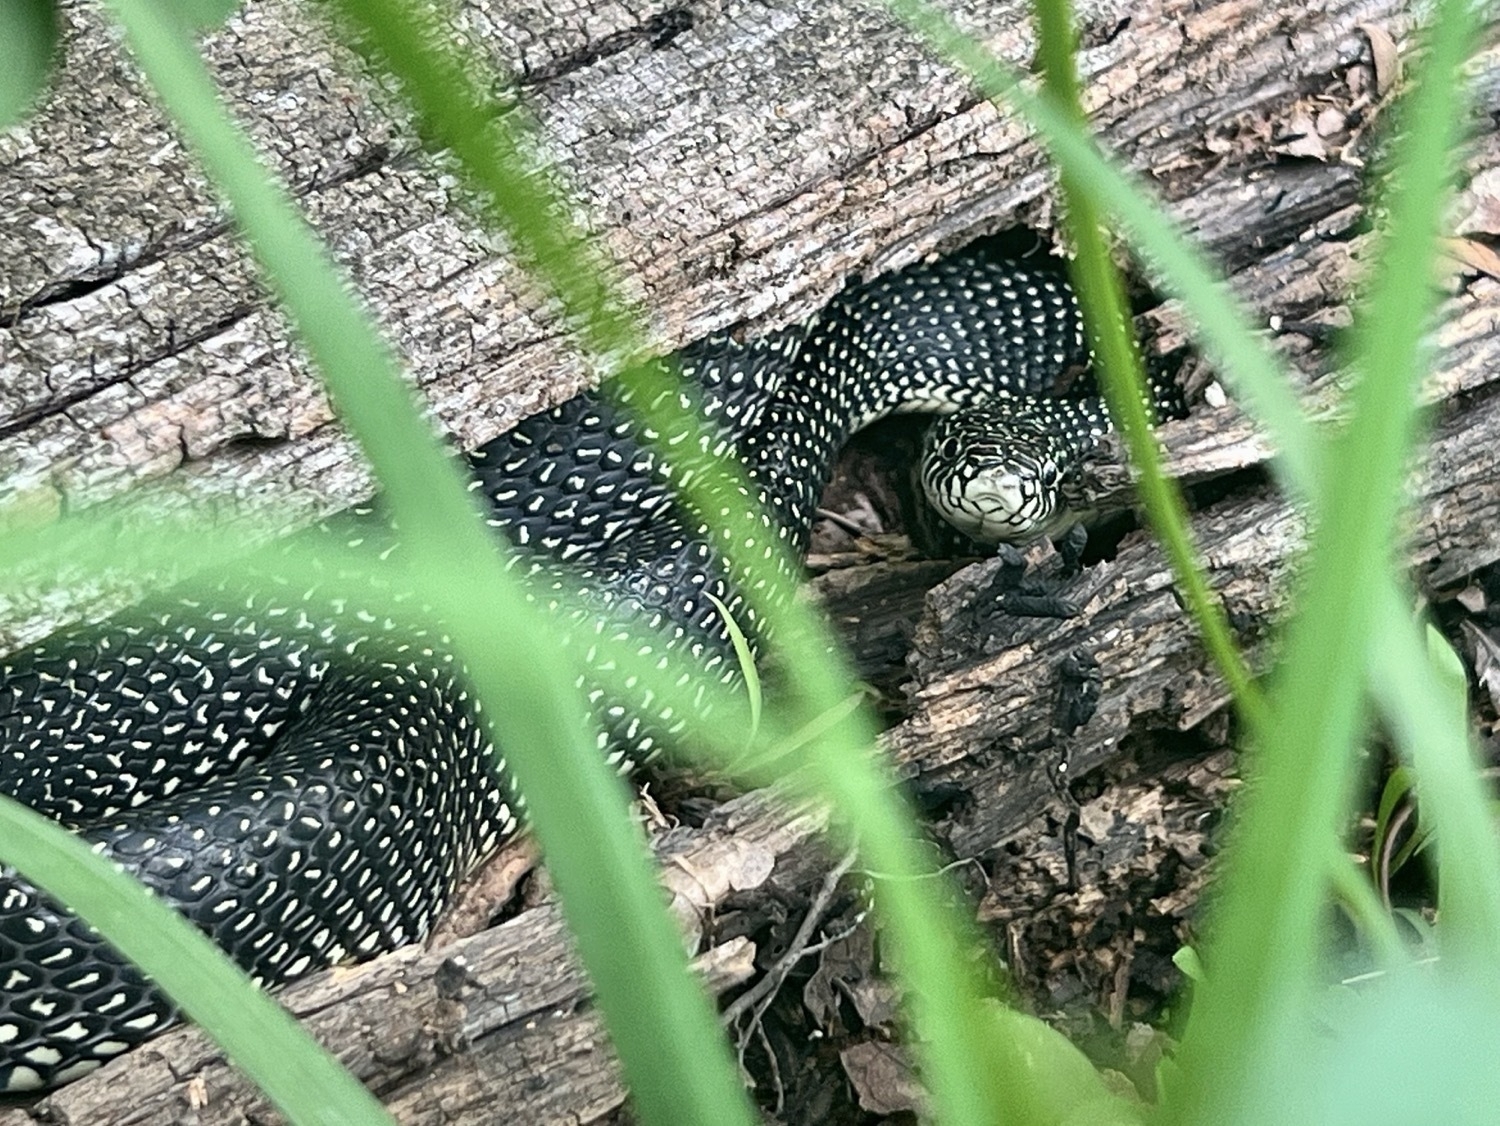 A￼ black snake with very small pale yellow to white speckles. The snake is nestled in a small open space in a log.